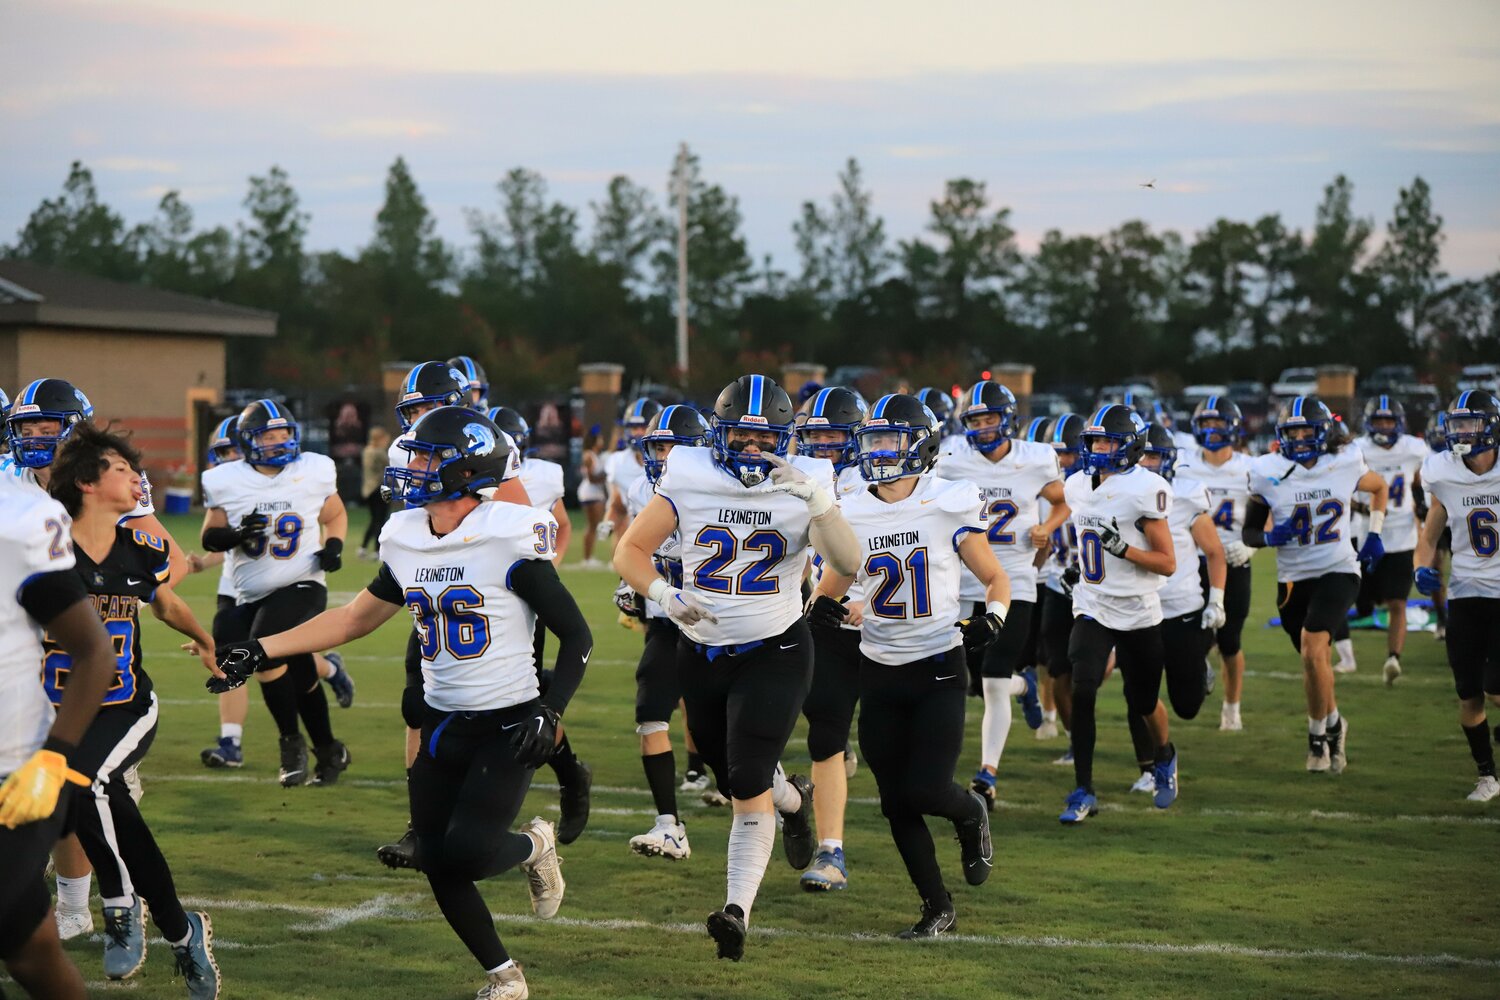 The Lexington Wildcats made their way onto the field before their game against Gilbert.